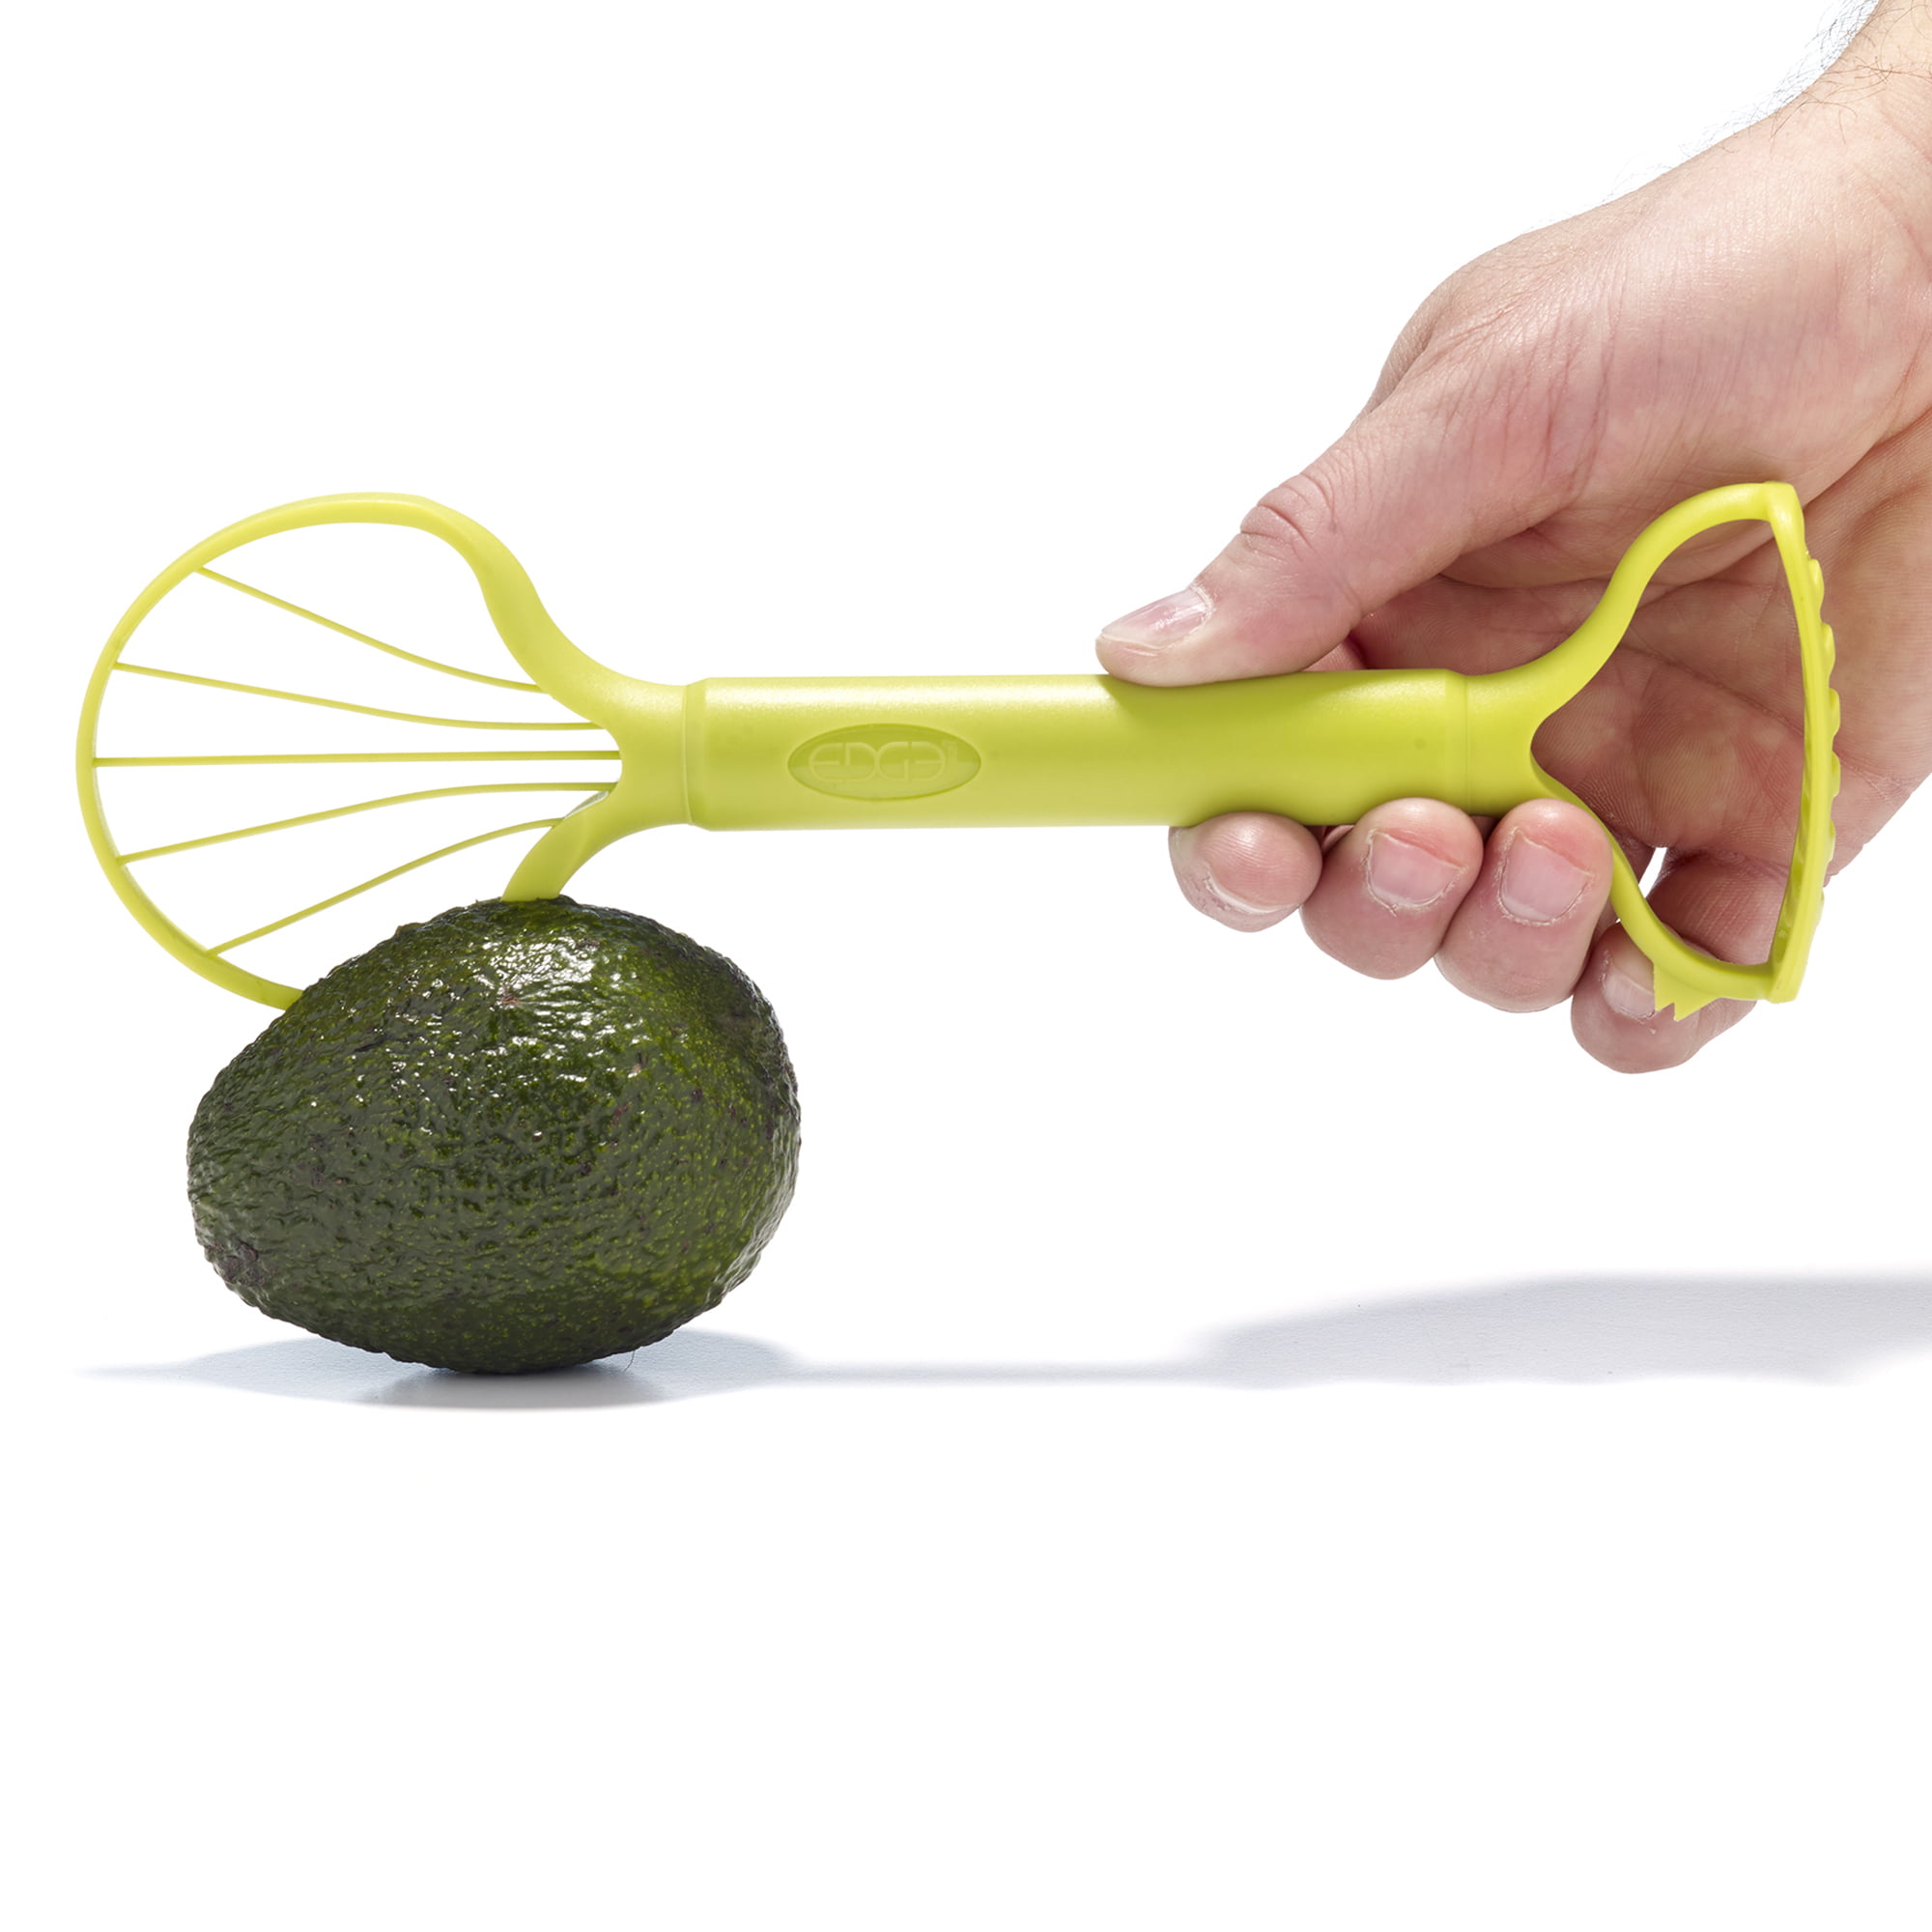 Fruit Vegetable Tools Sublimation Press Mud Tool Potato Avocado Mash  Pressed Tools Masher Avocados Stainless Steel Kitchen Accesso Dhosm From  Jycxhome, $2.11